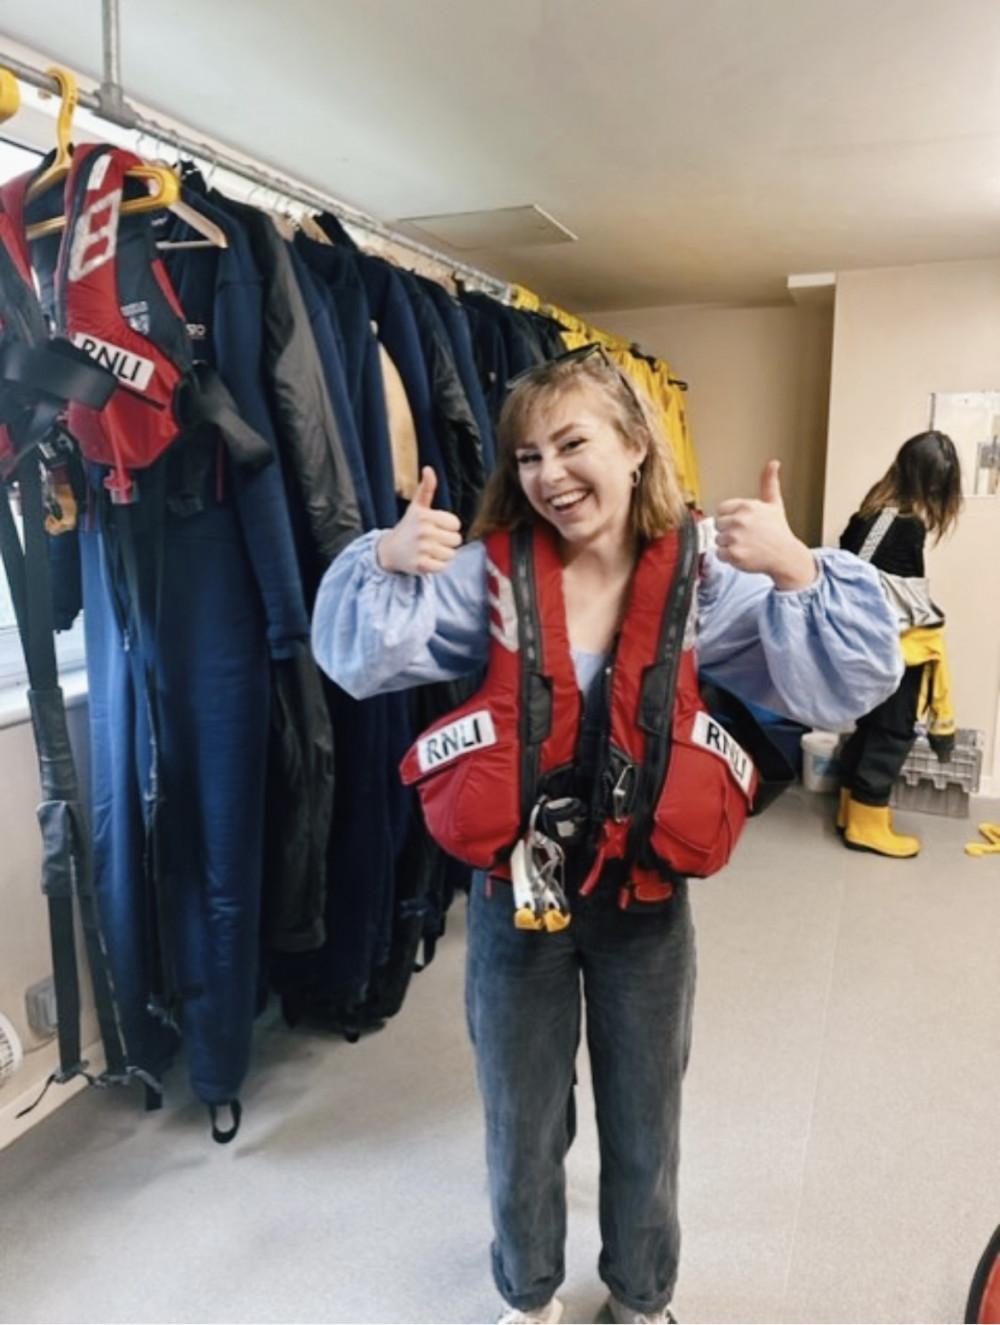 Trying on a life jacket at the RNLI boat naming. (Photo: RNLI)